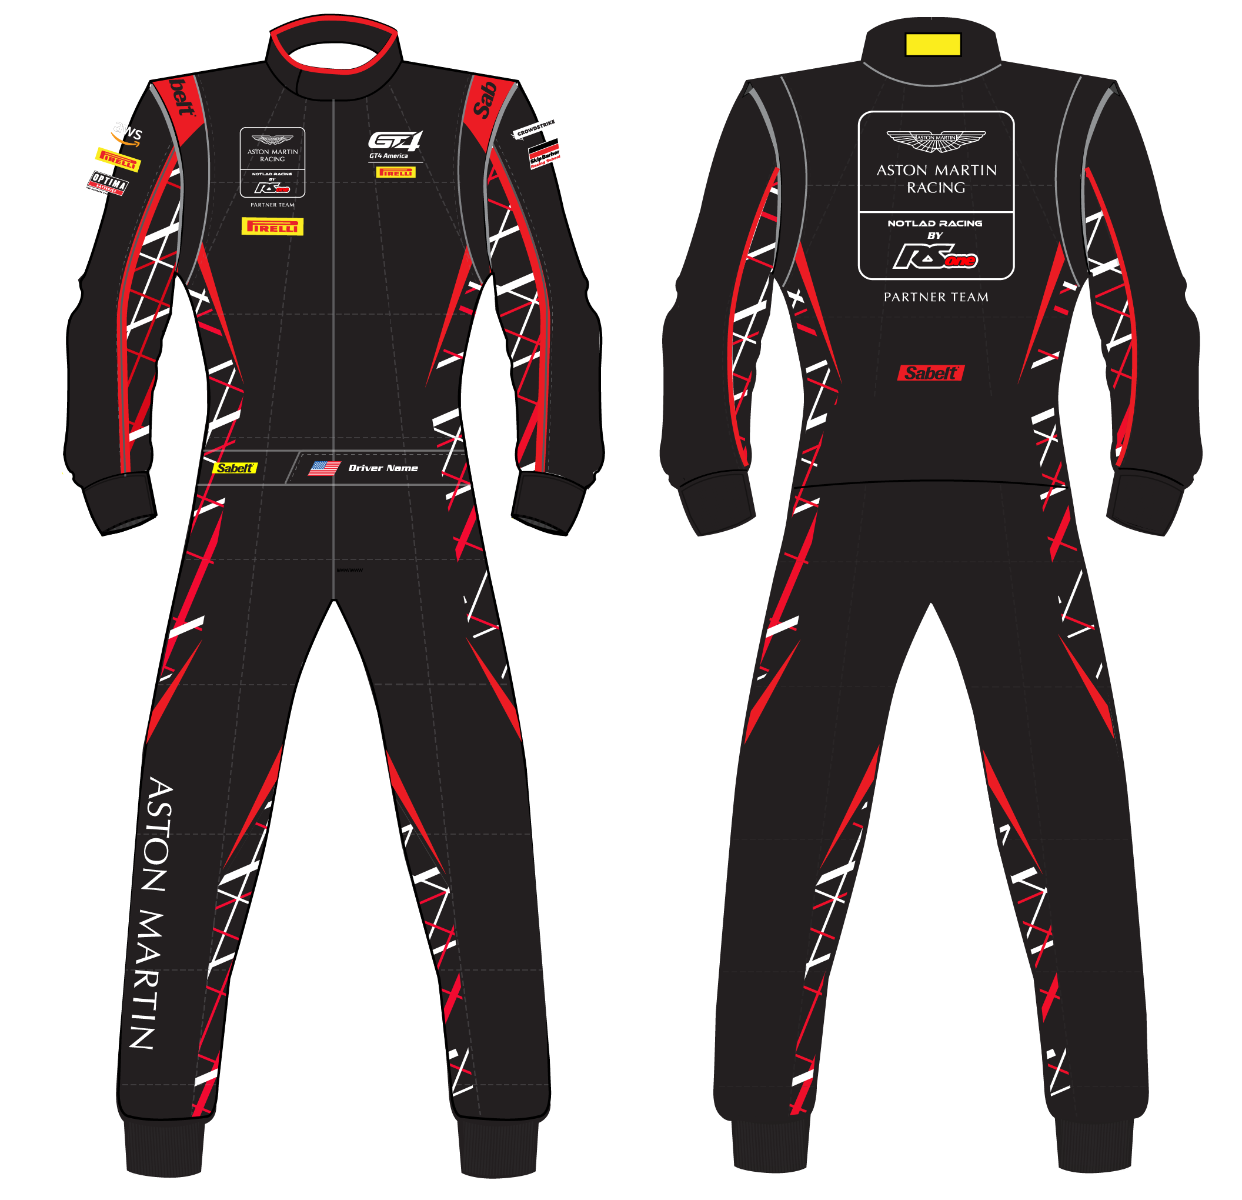 Sabelt TS-10 Race Suit Custom Design affordable best deal and lowest price after discount pro series